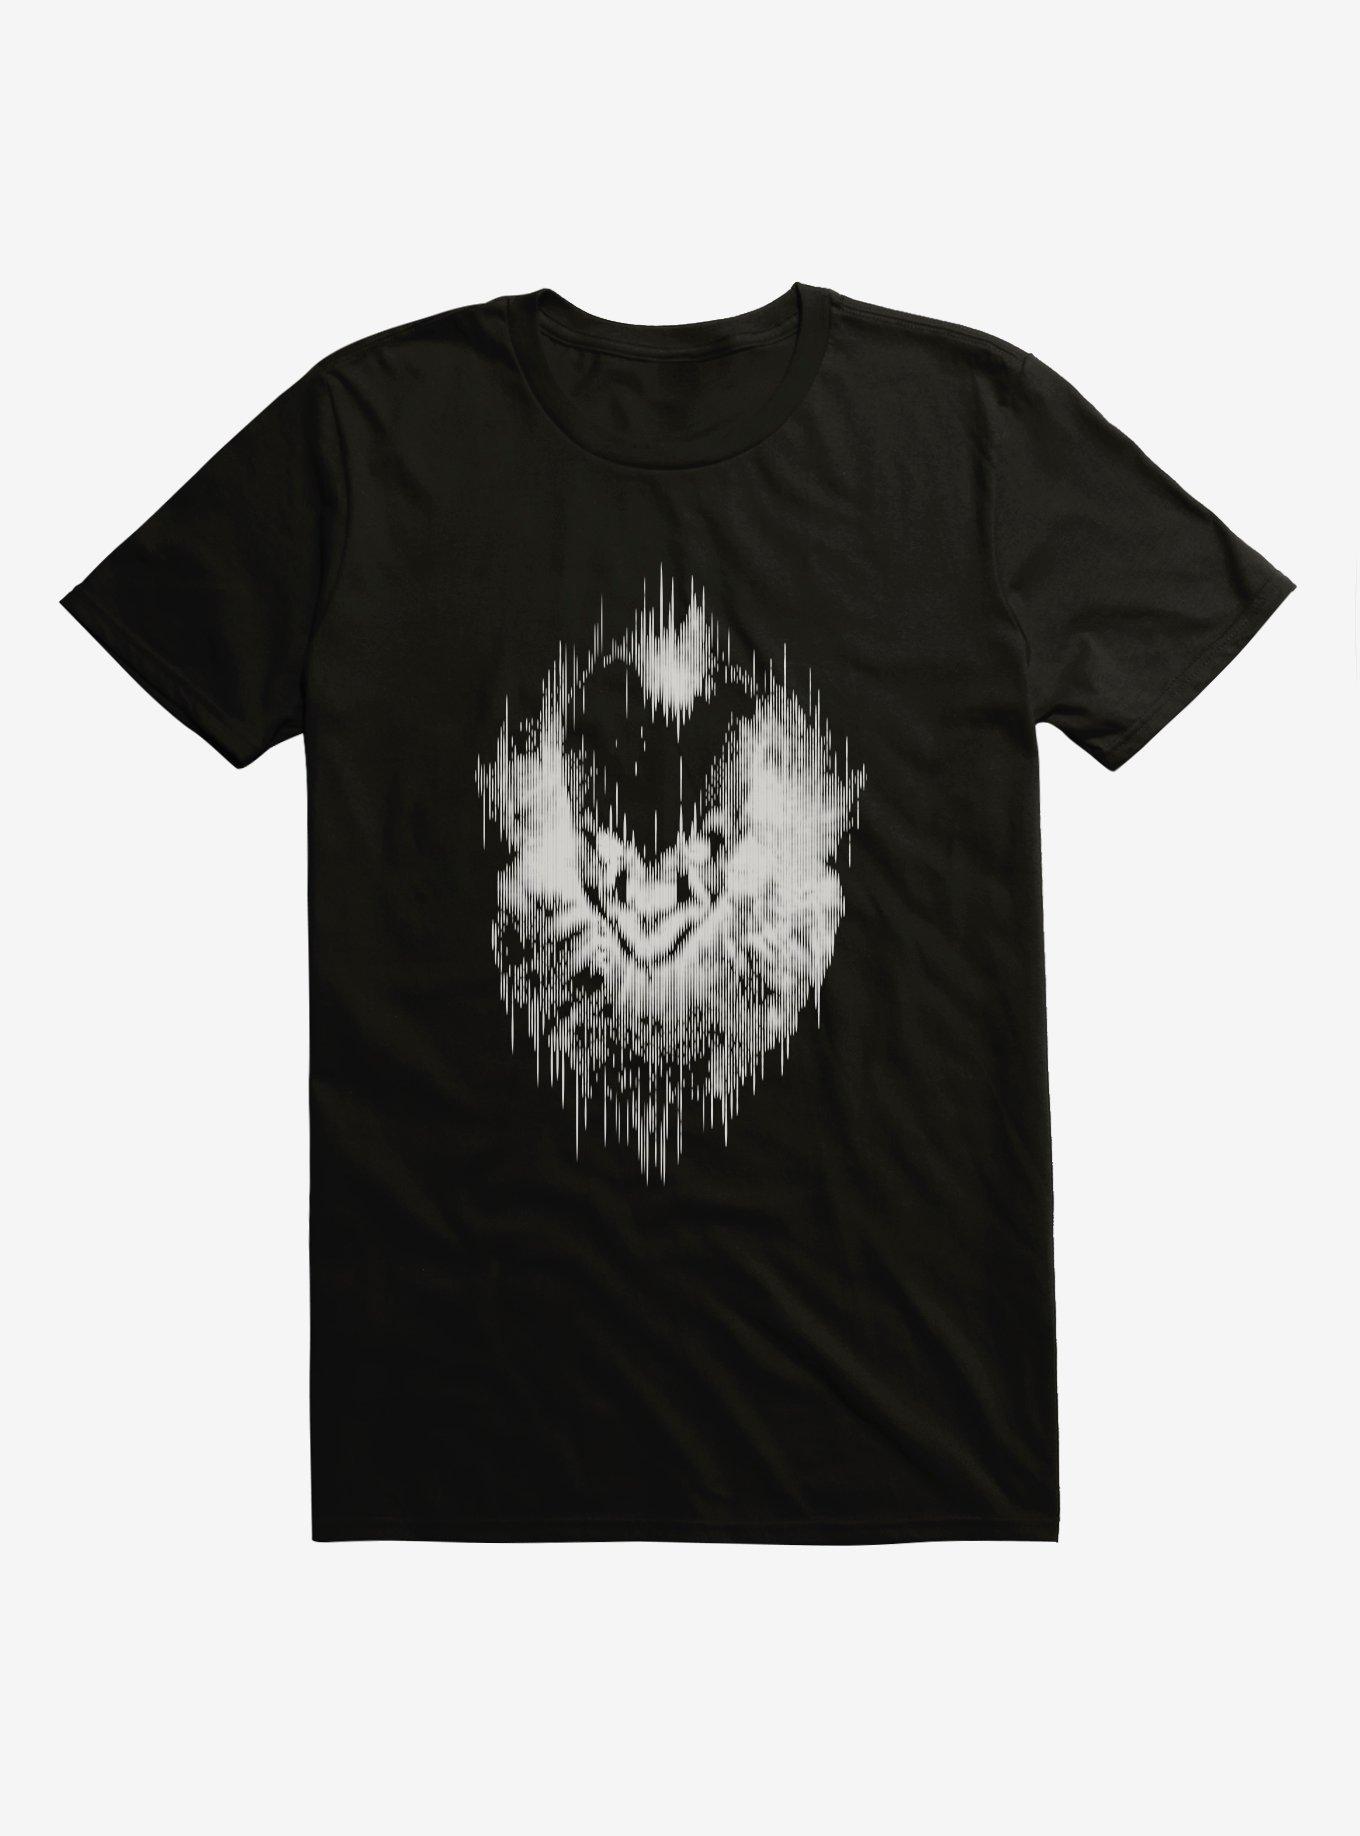 IT Chapter Two Pennywise Static Outline T-Shirt